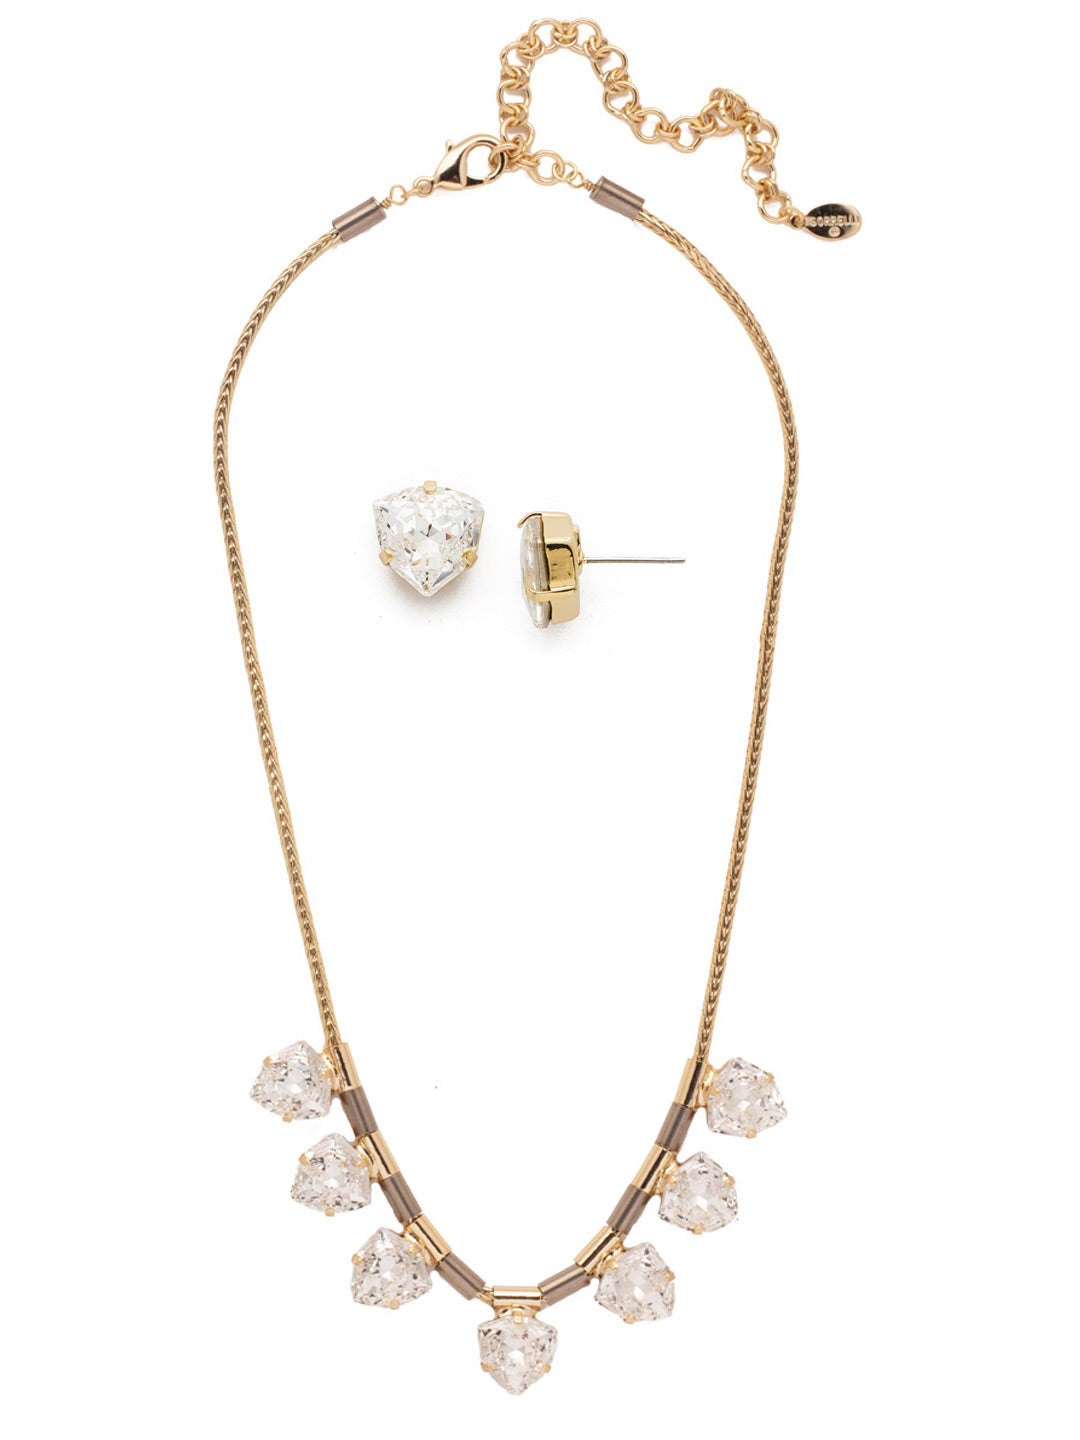 Stella Necklace/Earring Gift Set - GCT109BGCRY - <p>The Stella gift set include triangular trillion cut crystal in a bright gold finish in this necklace and earring gift set combo. From Sorrelli's Crystal collection in our Bright Gold-tone finish.</p>